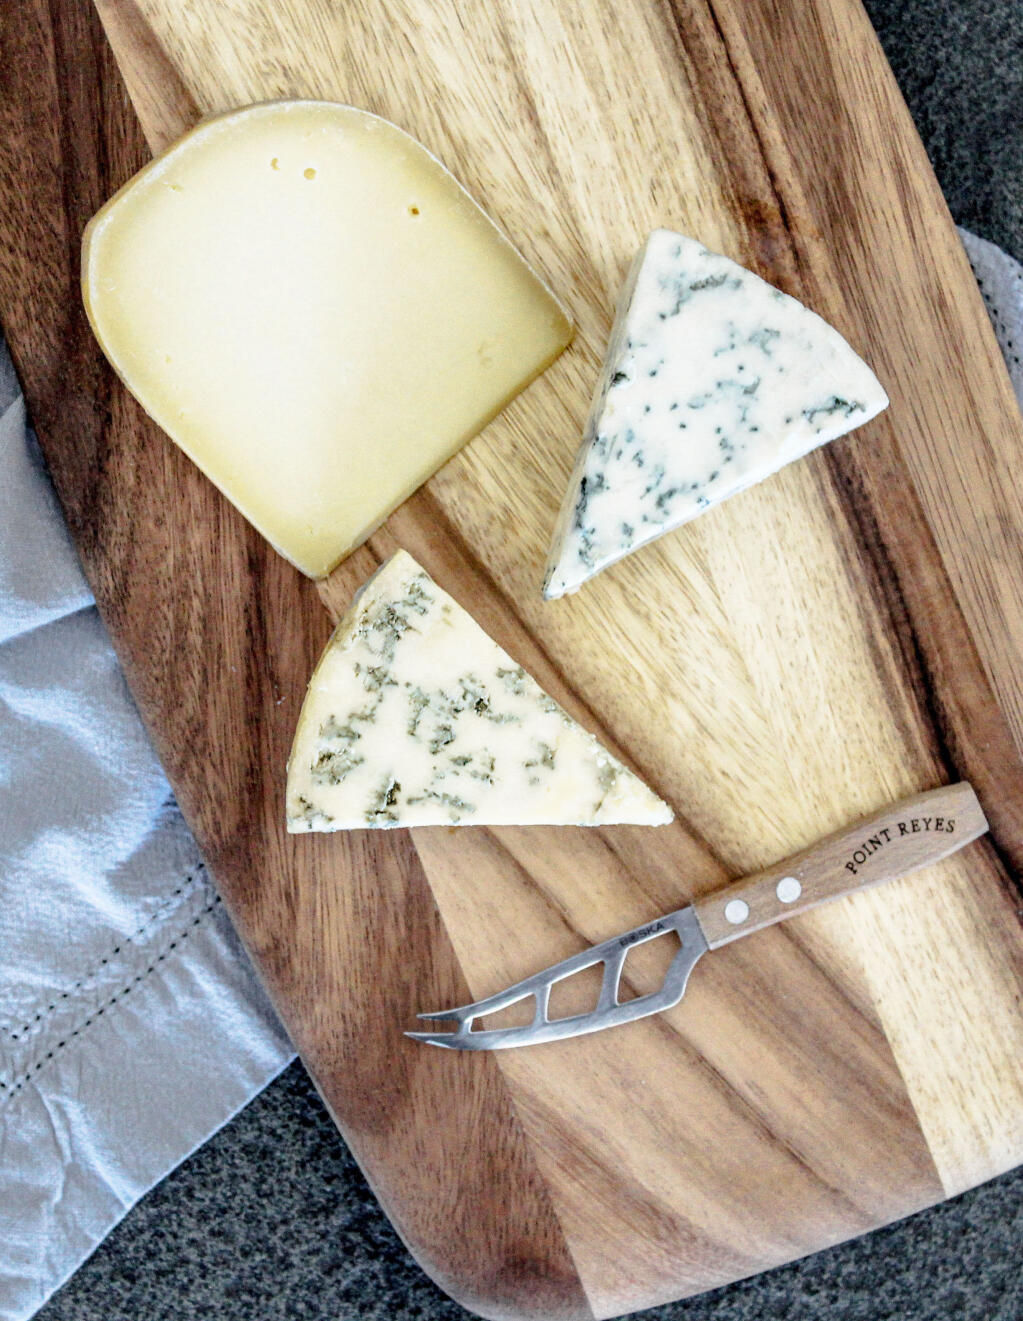 Point Reyes Farmstead Cheese will present a virtual cooking demo with three of their award-winning cheeses on July 29 to benefit Homeward Bound of Marin. (Point Reyes Farmstead Cheese)